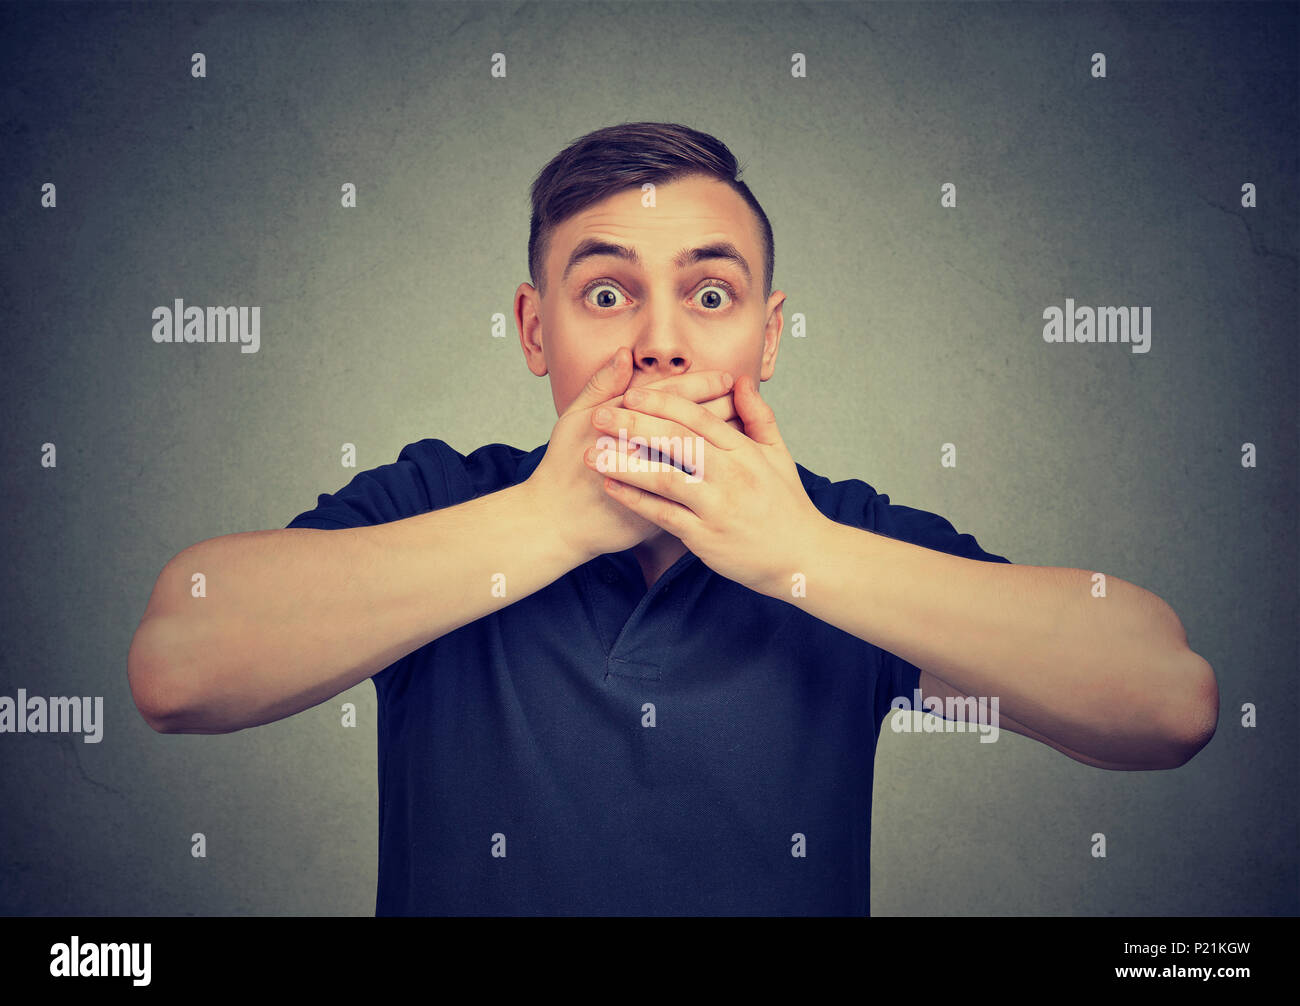 scared man with hands covering mouth anxiously looking at camera Stock Photo